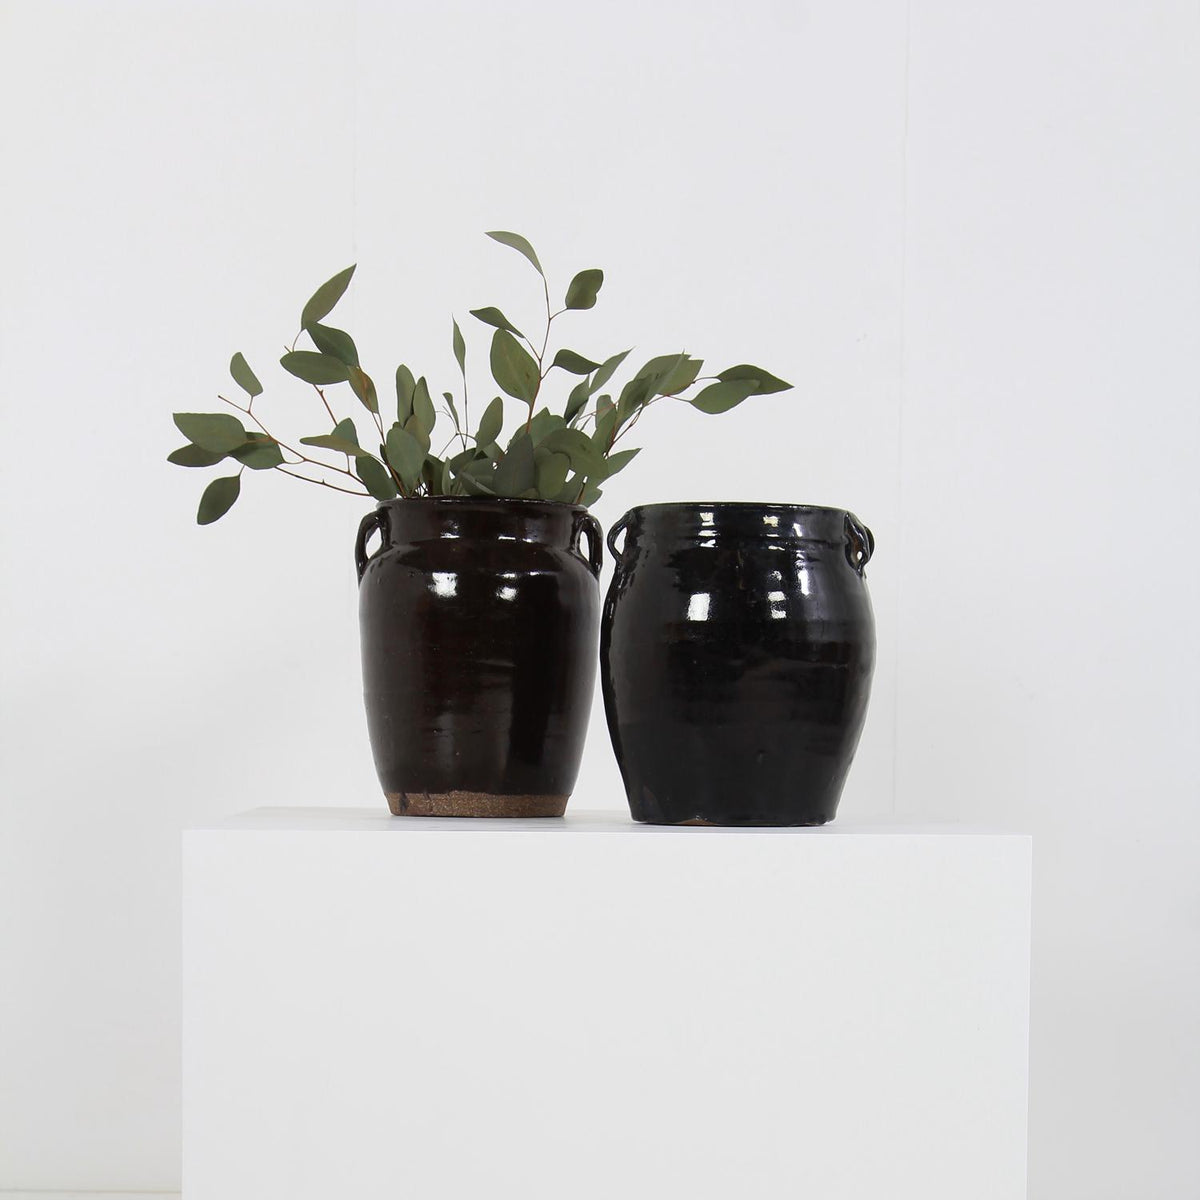 Collection of Two  Handmade Chinese  Black Glazed Pottery Jars